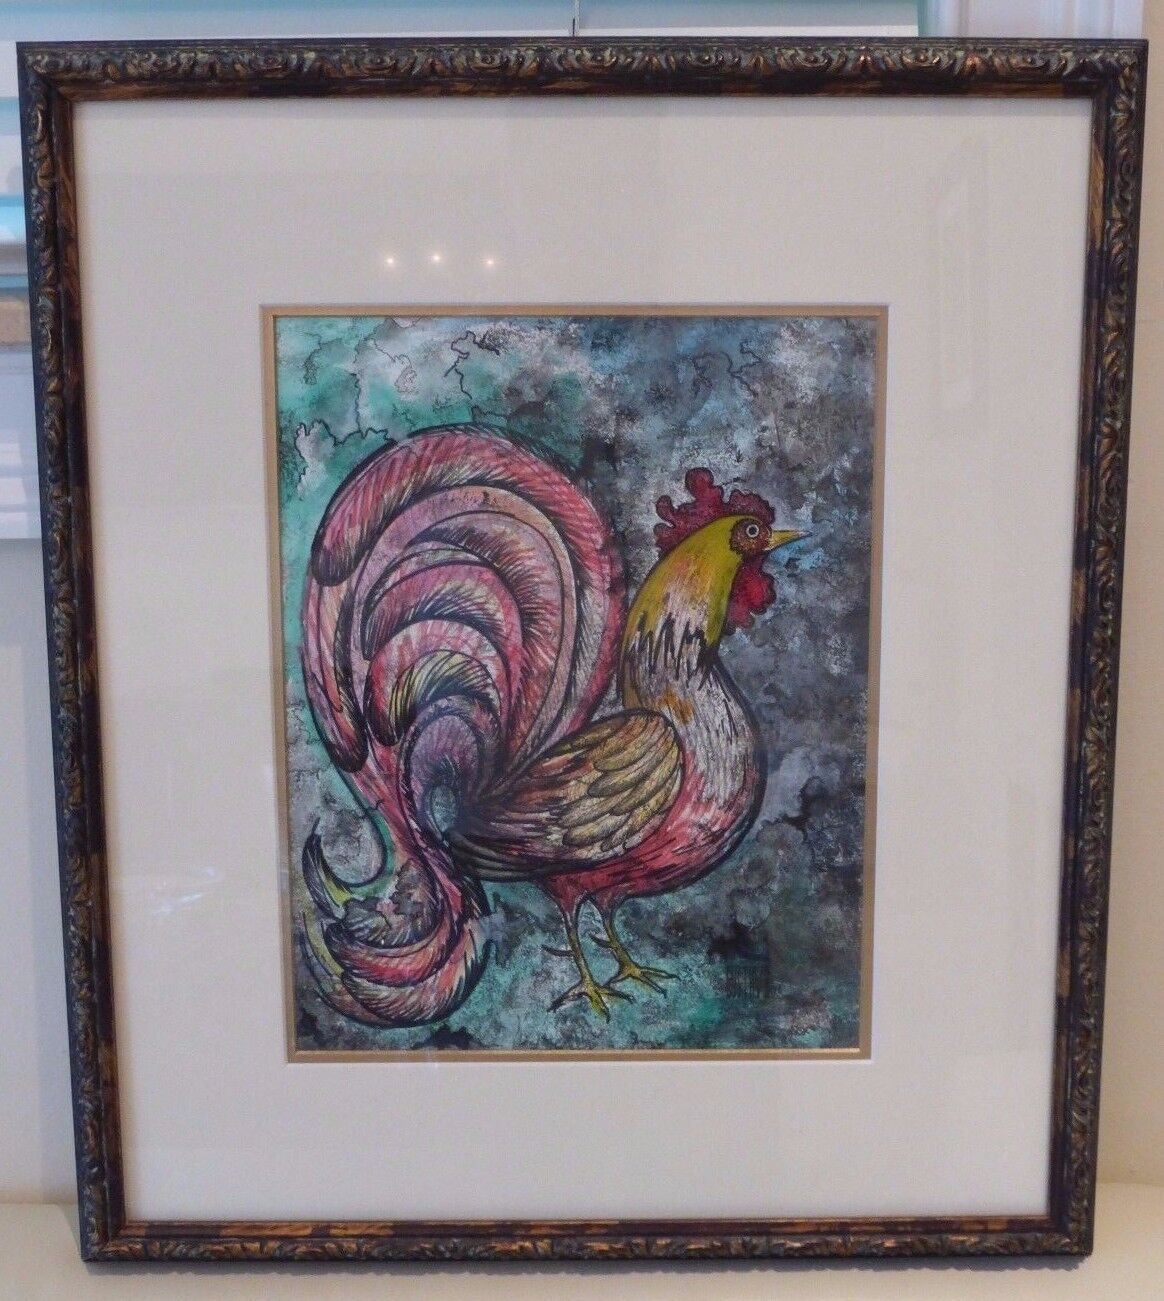 Original Watercolor Painting Signed by Artist and Nicely Framed